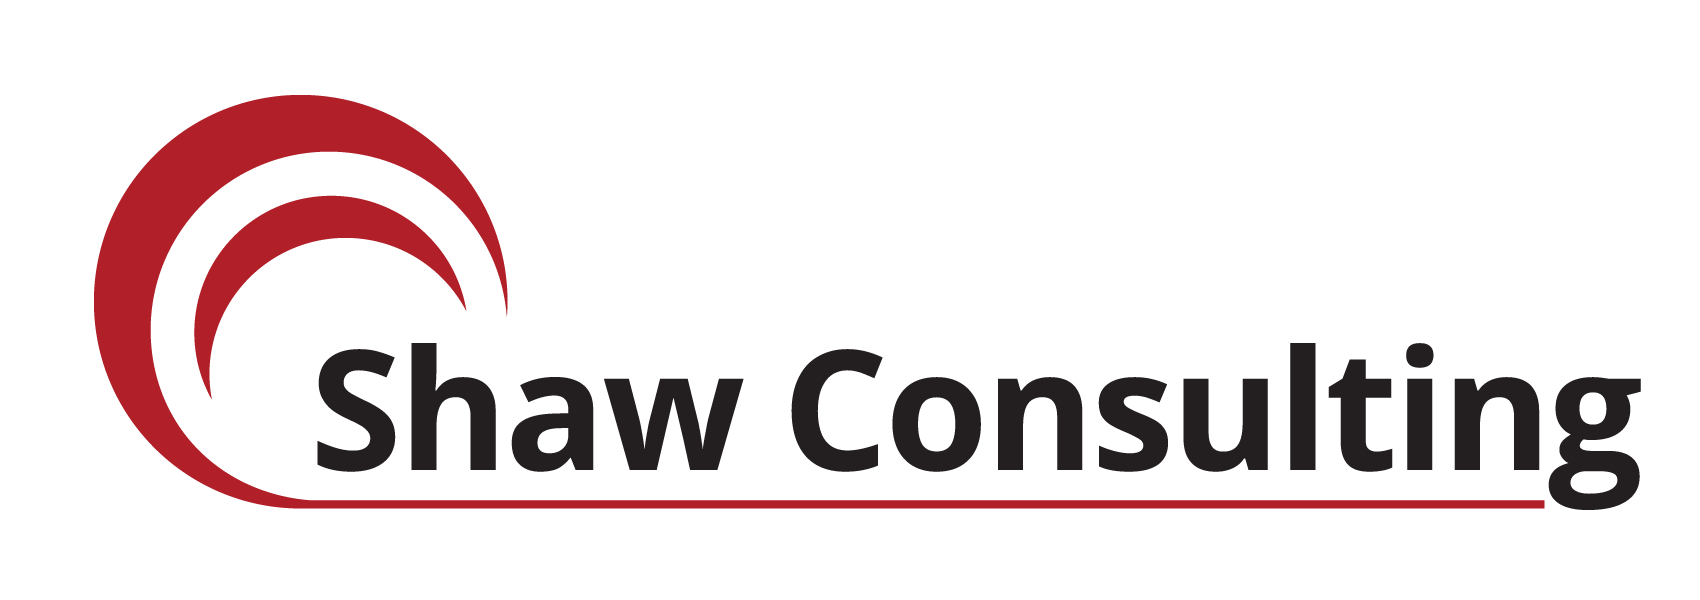 Shaw Consulting